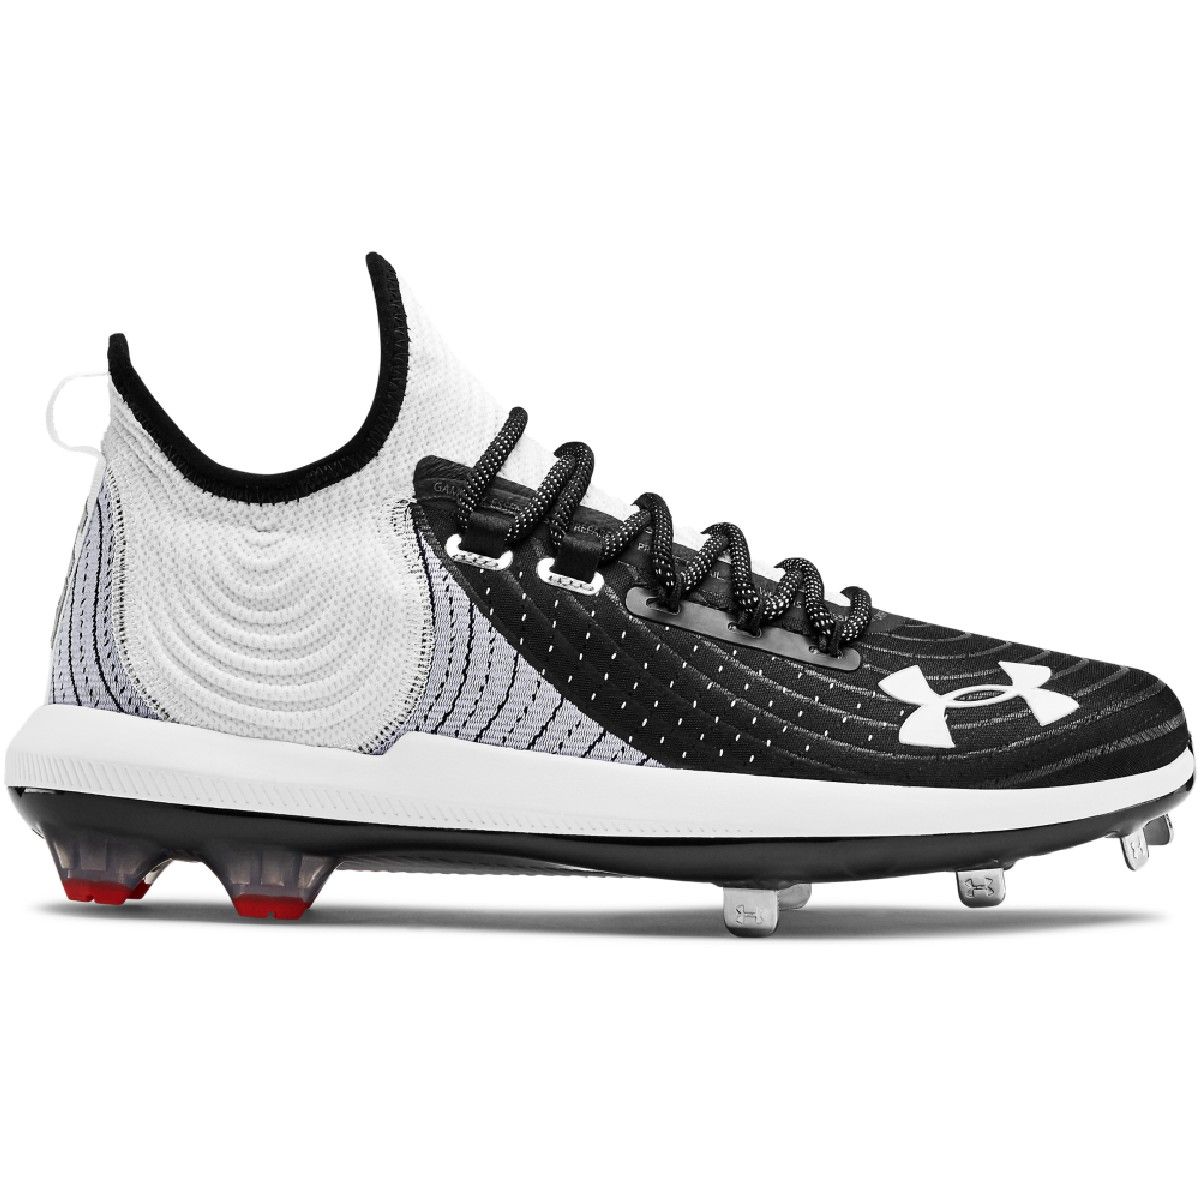 Black used Adult Men's 8.5 (W 9.5) Molded Under Armour Bryce Harper Cleat